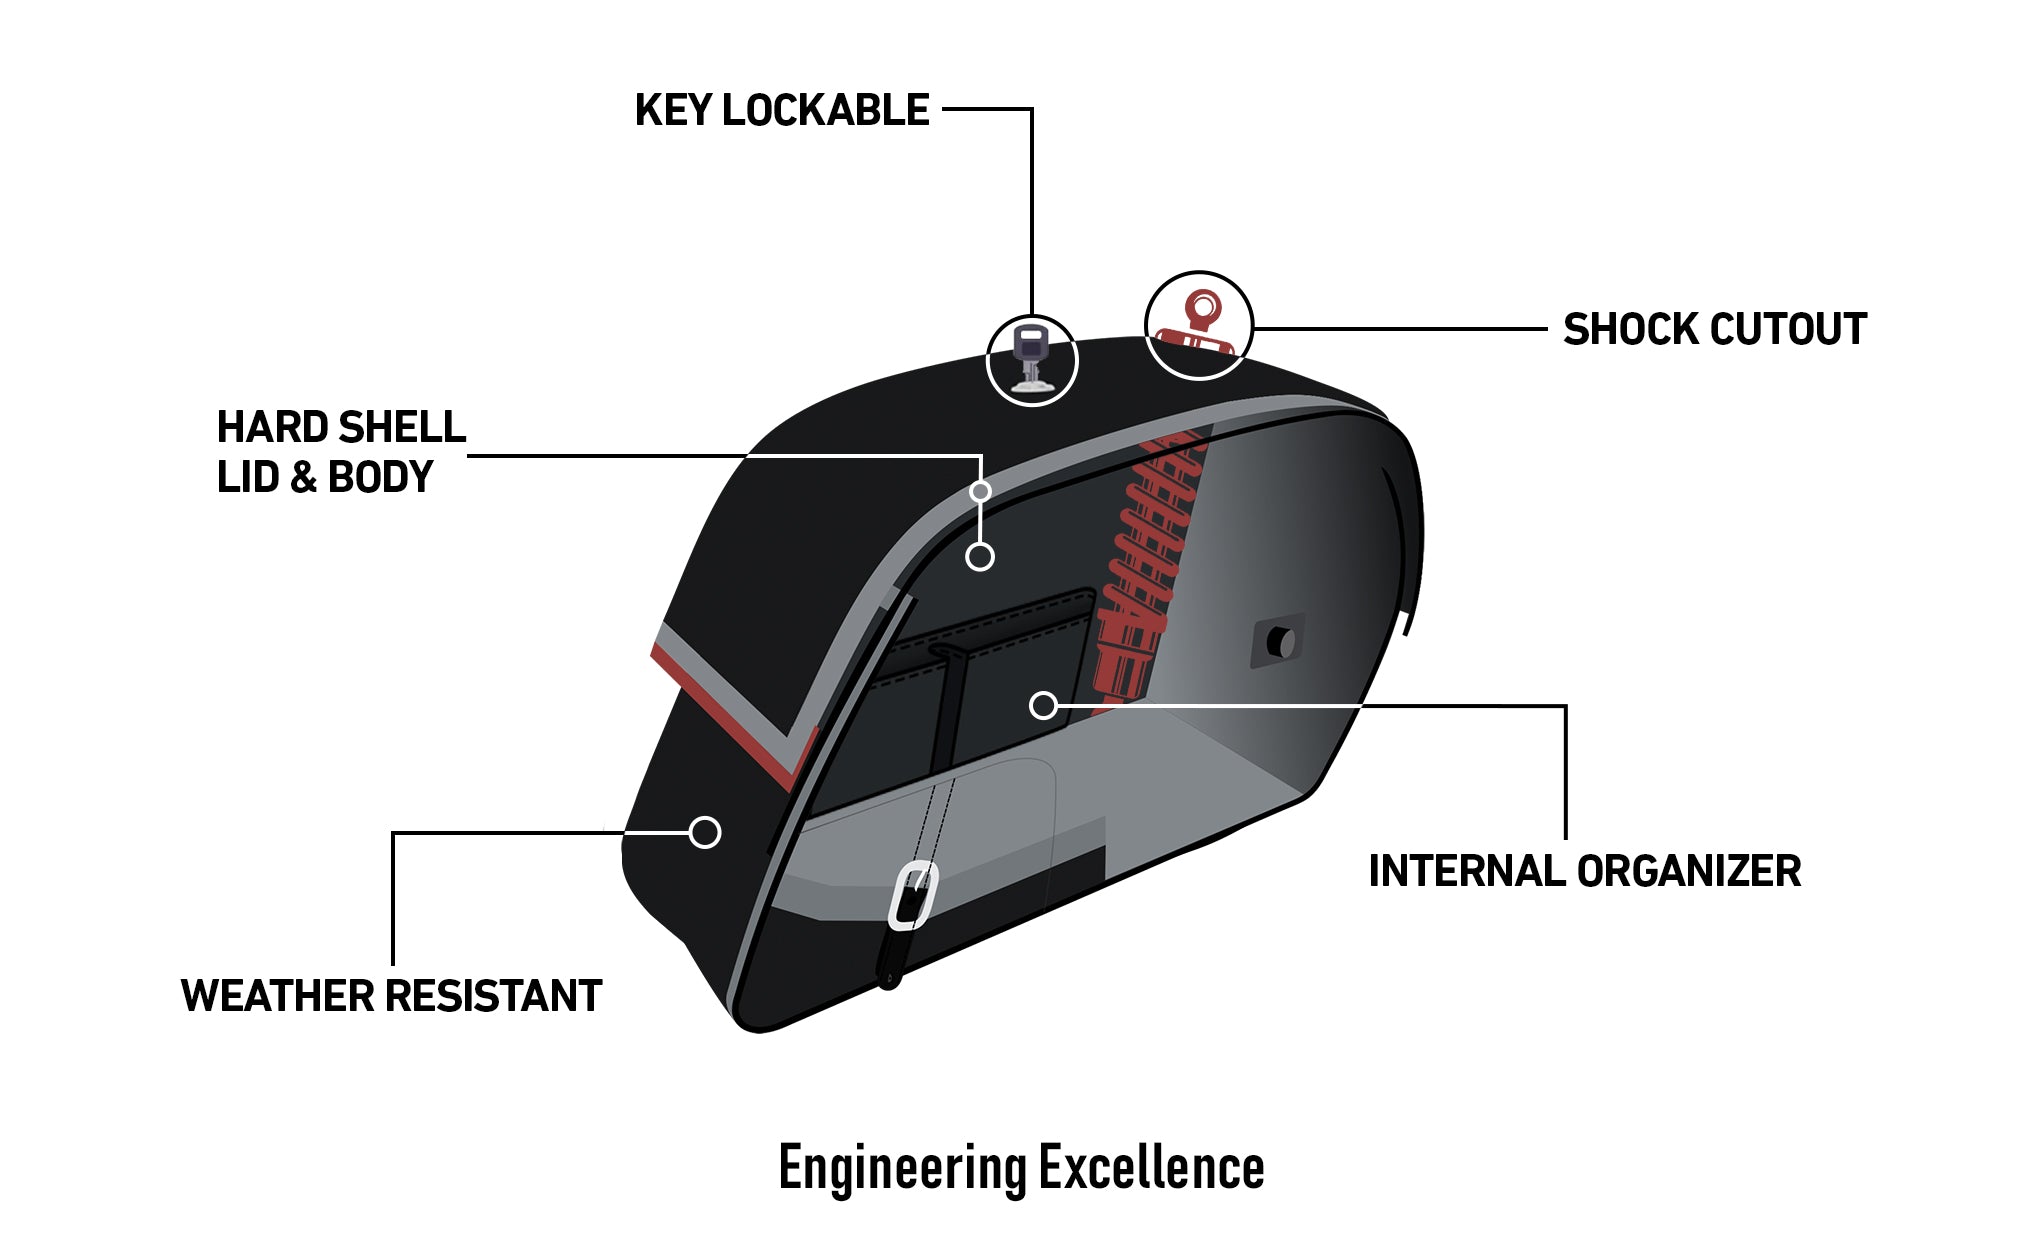 Viking Essential Side Pocket Large Hyosung Aquila Gv 250 Shock Cutout Leather Motorcycle Saddlebags Engineering Excellence with Bag on Bike @expand